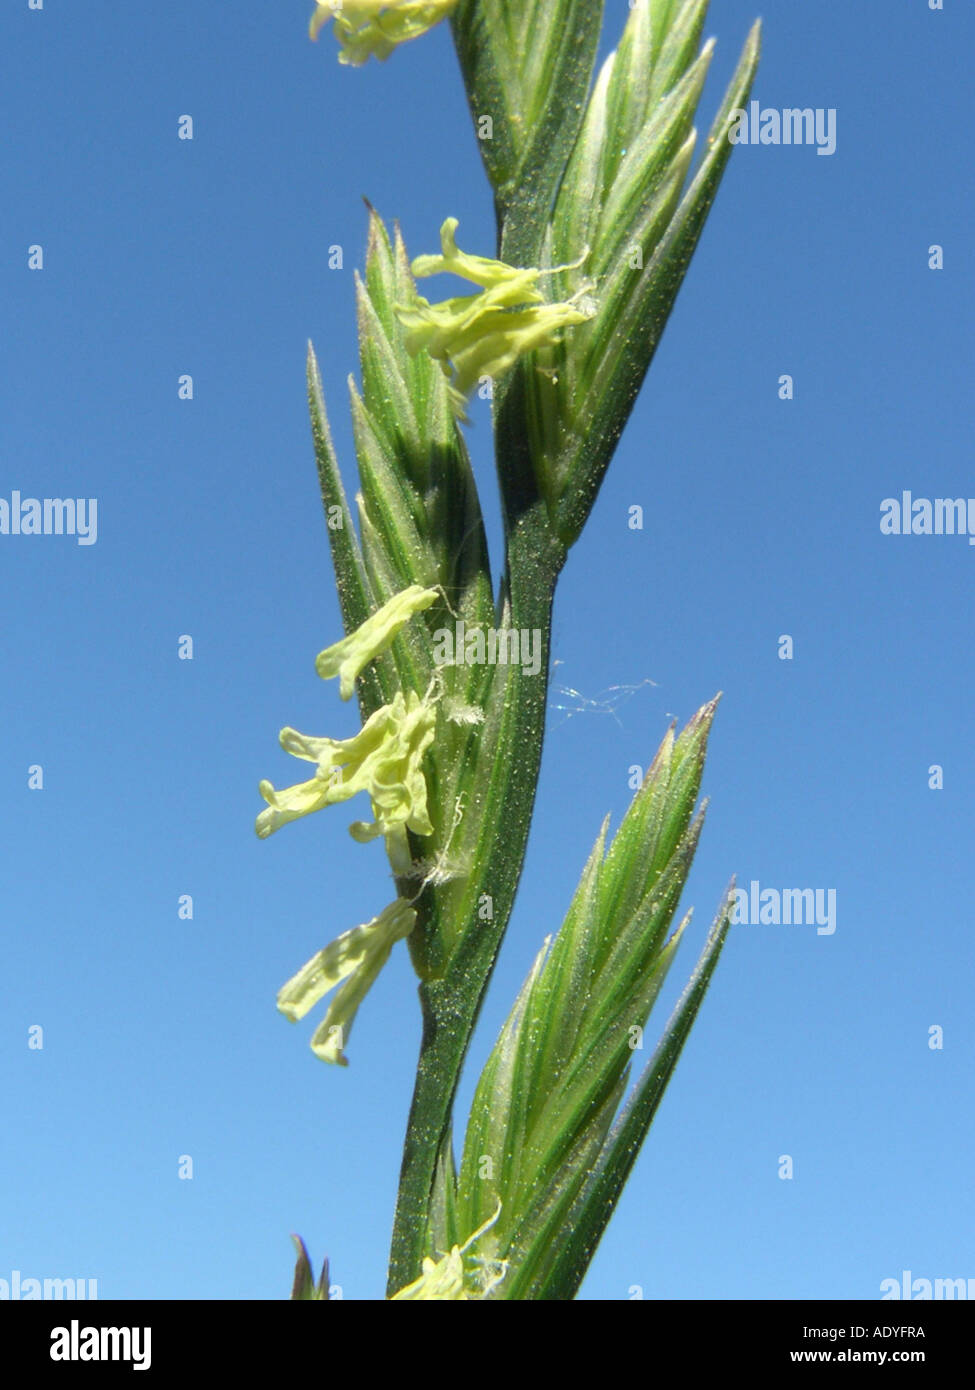 common darnel, common ray, perennial ray, perennial rye-grass (Lolium perenne var. perenne), spikelet against blue sky Stock Photo